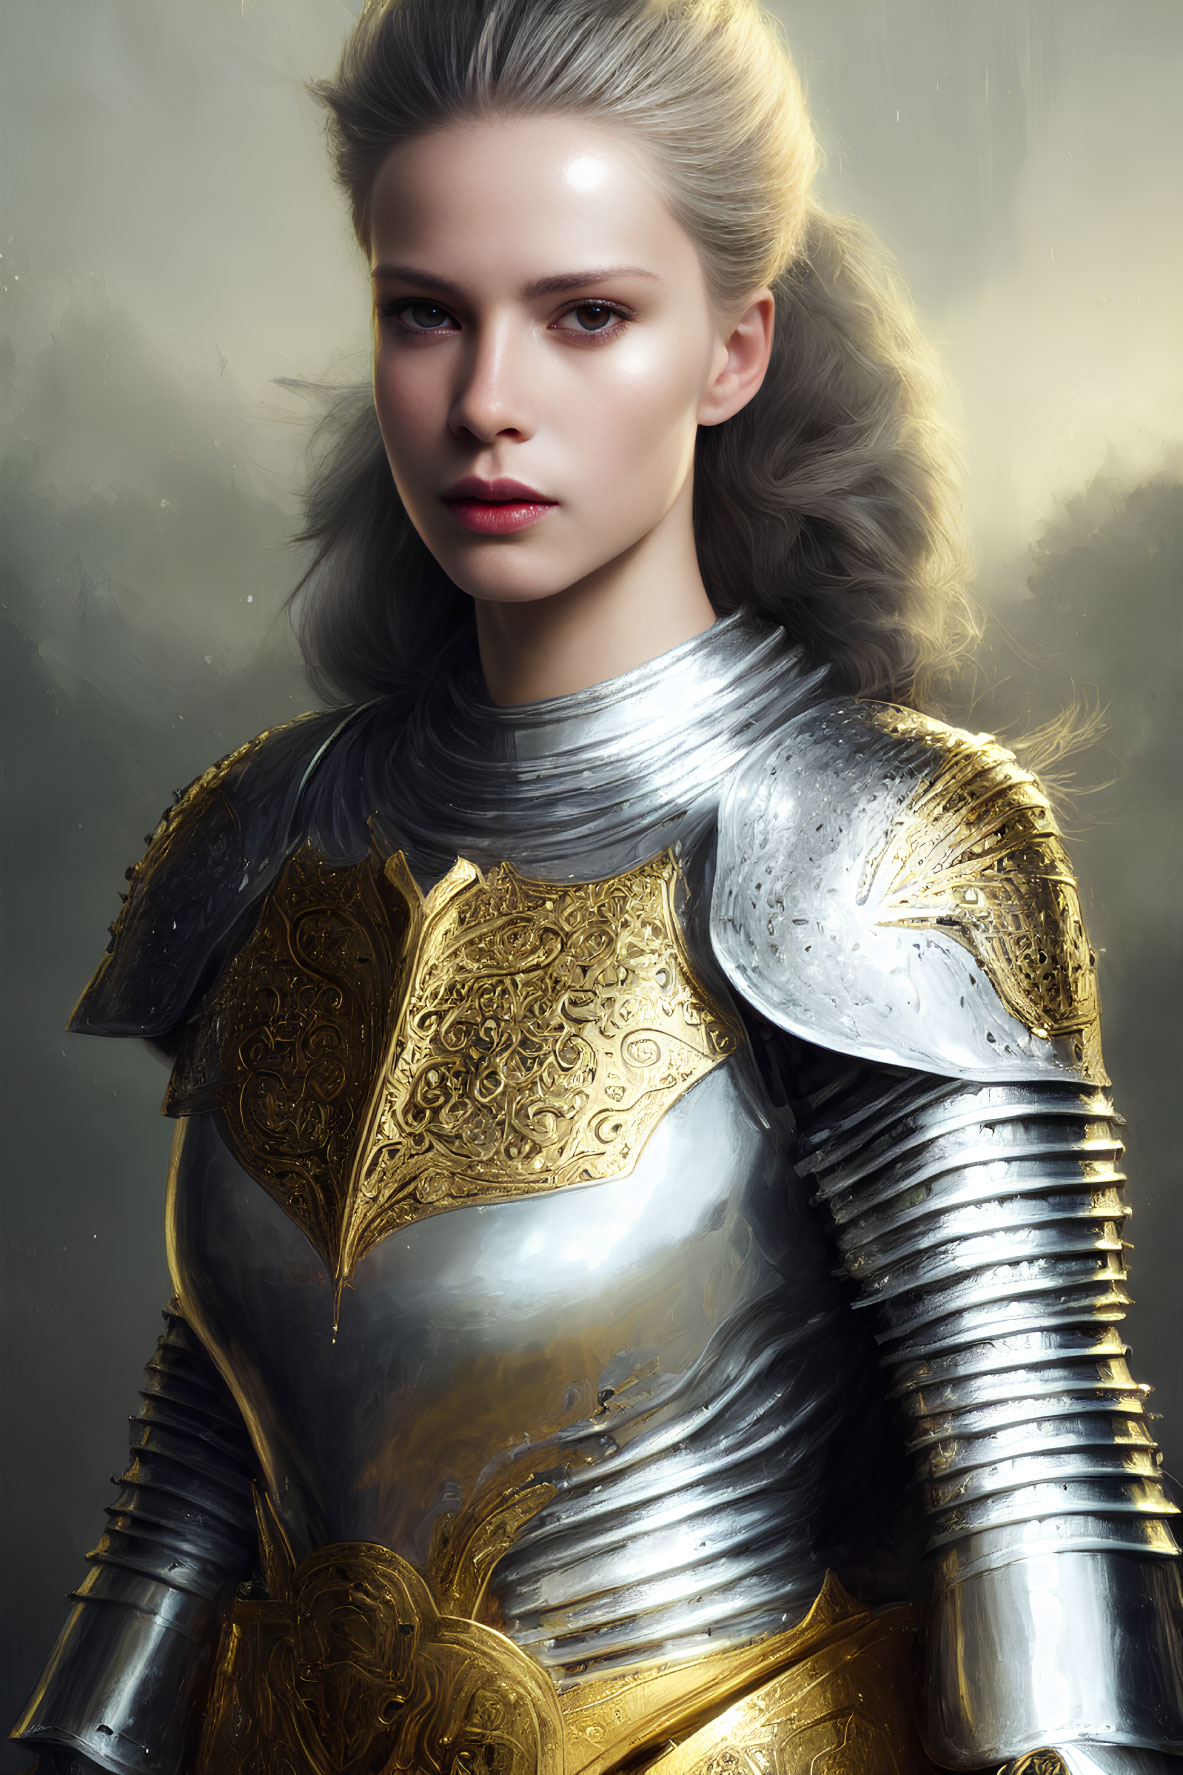 Female warrior in silver and gold ornate armor with flowing hair on golden backdrop